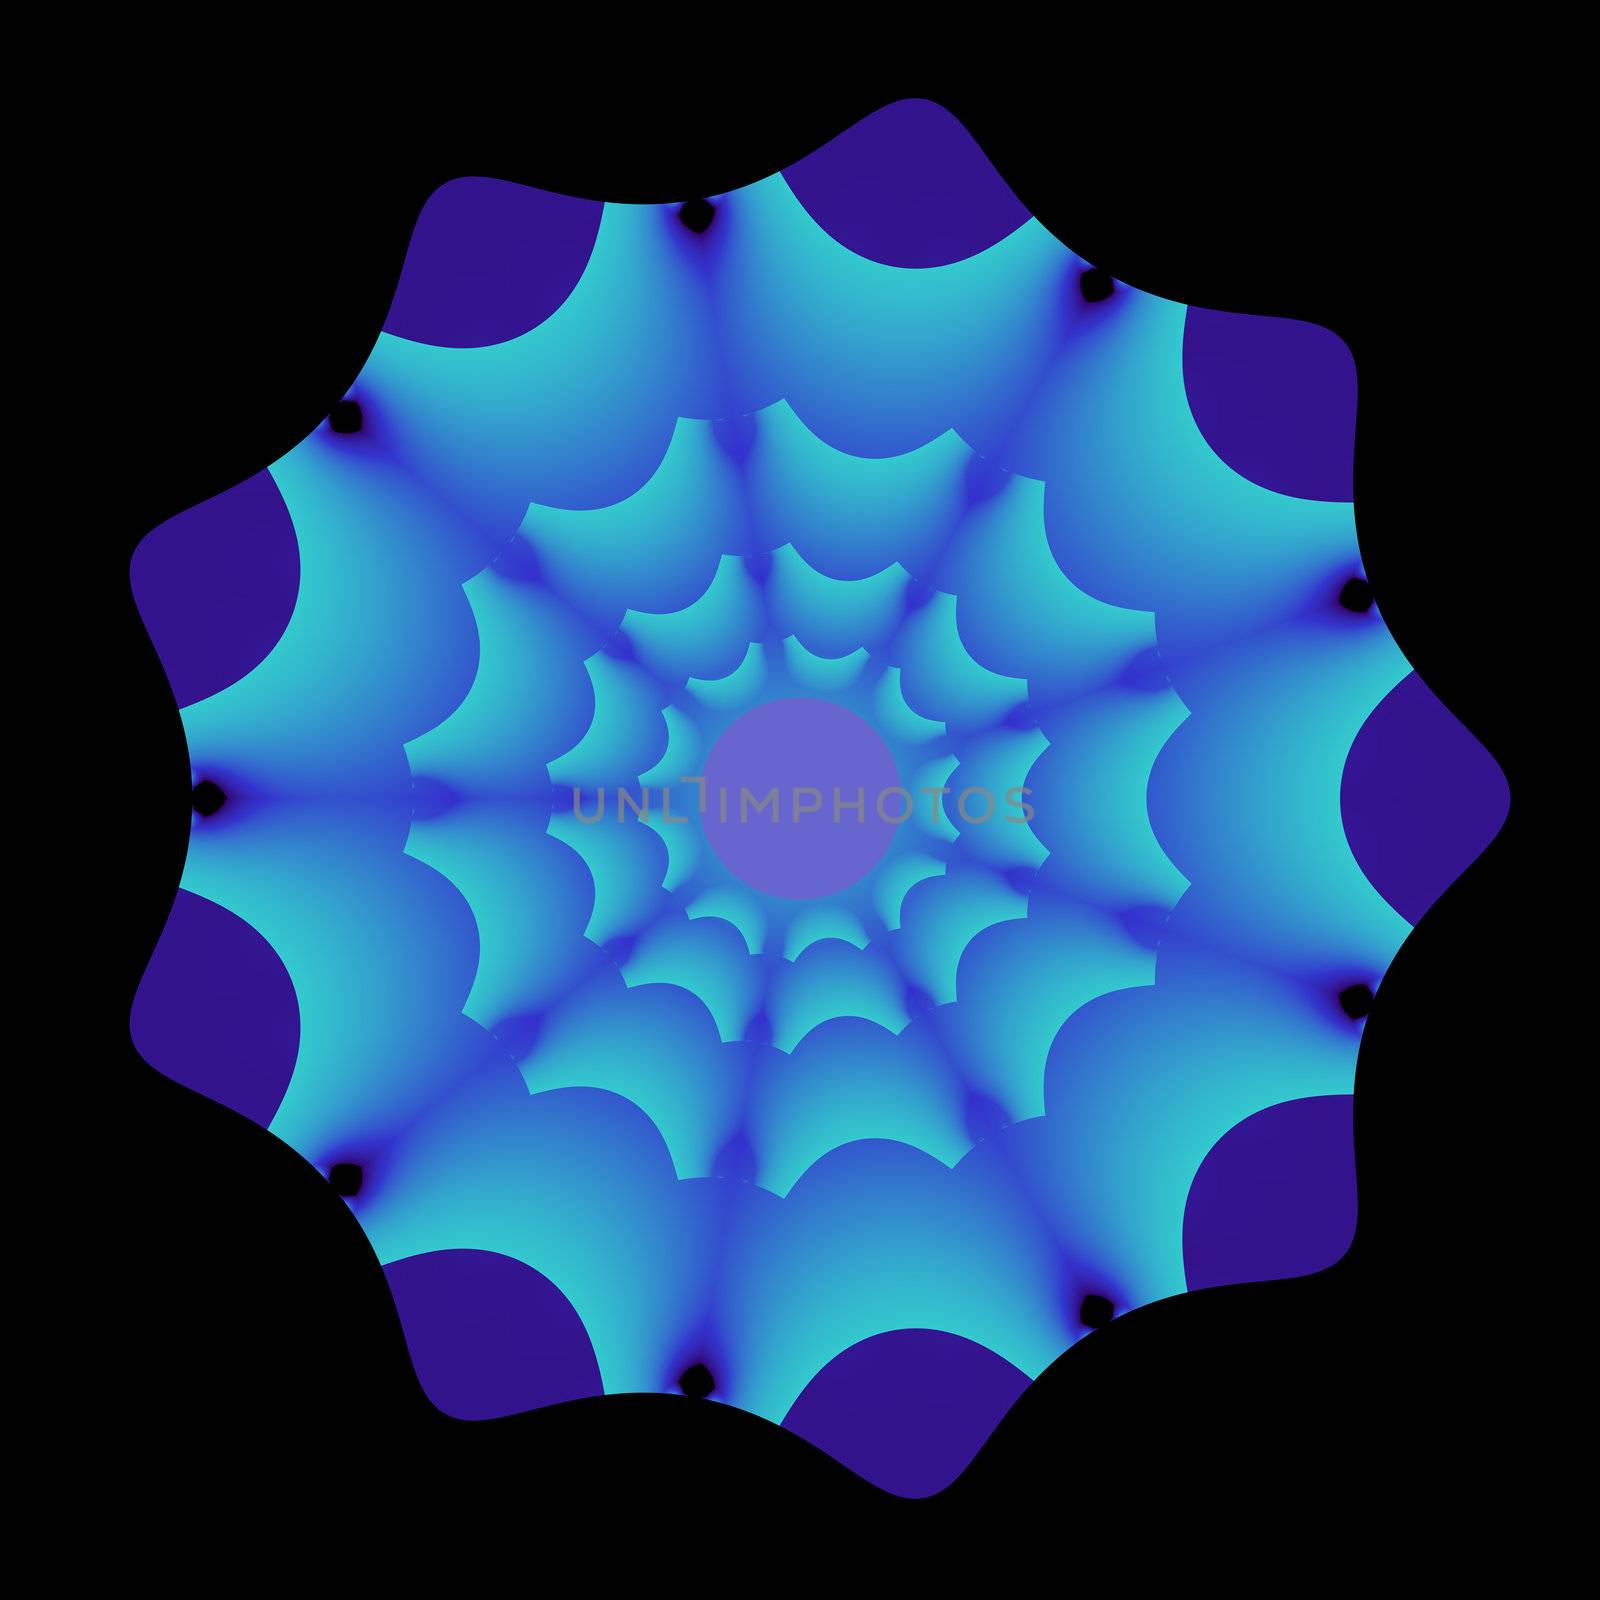 An stylized floral fractal done in cool shades of blue and purple.